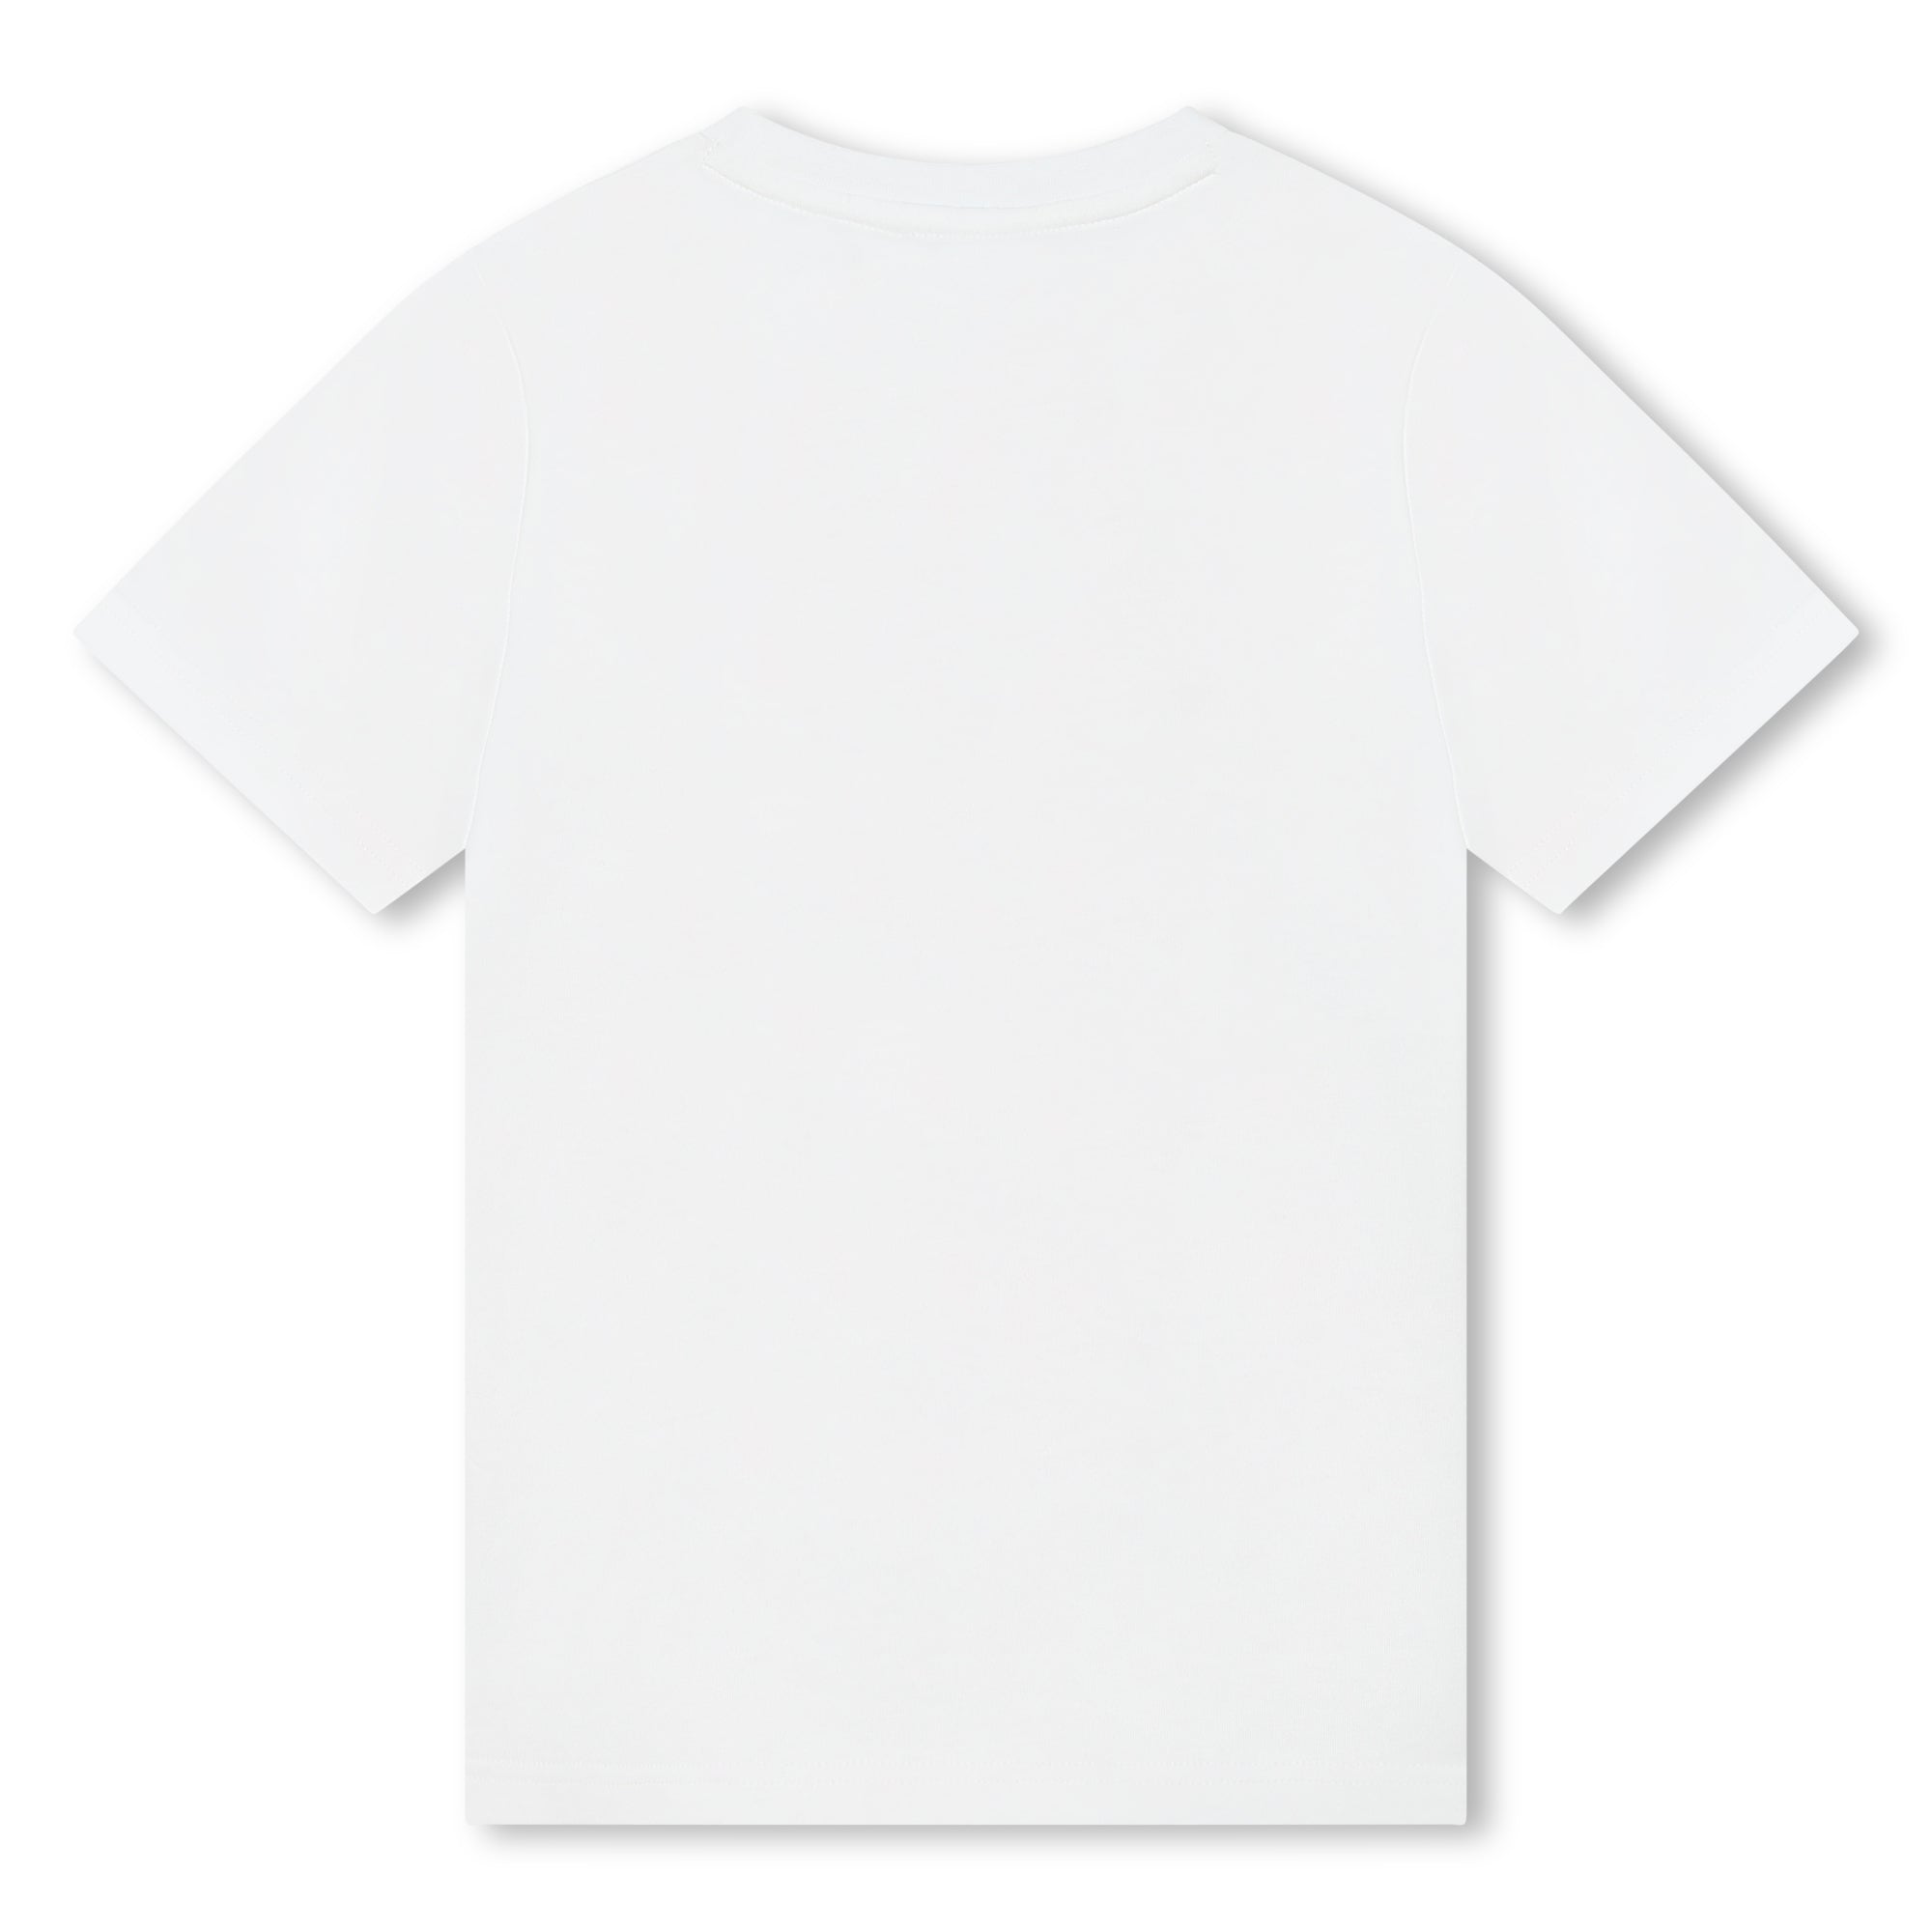 DKNY White with Multicolor Logo Tee Shirt